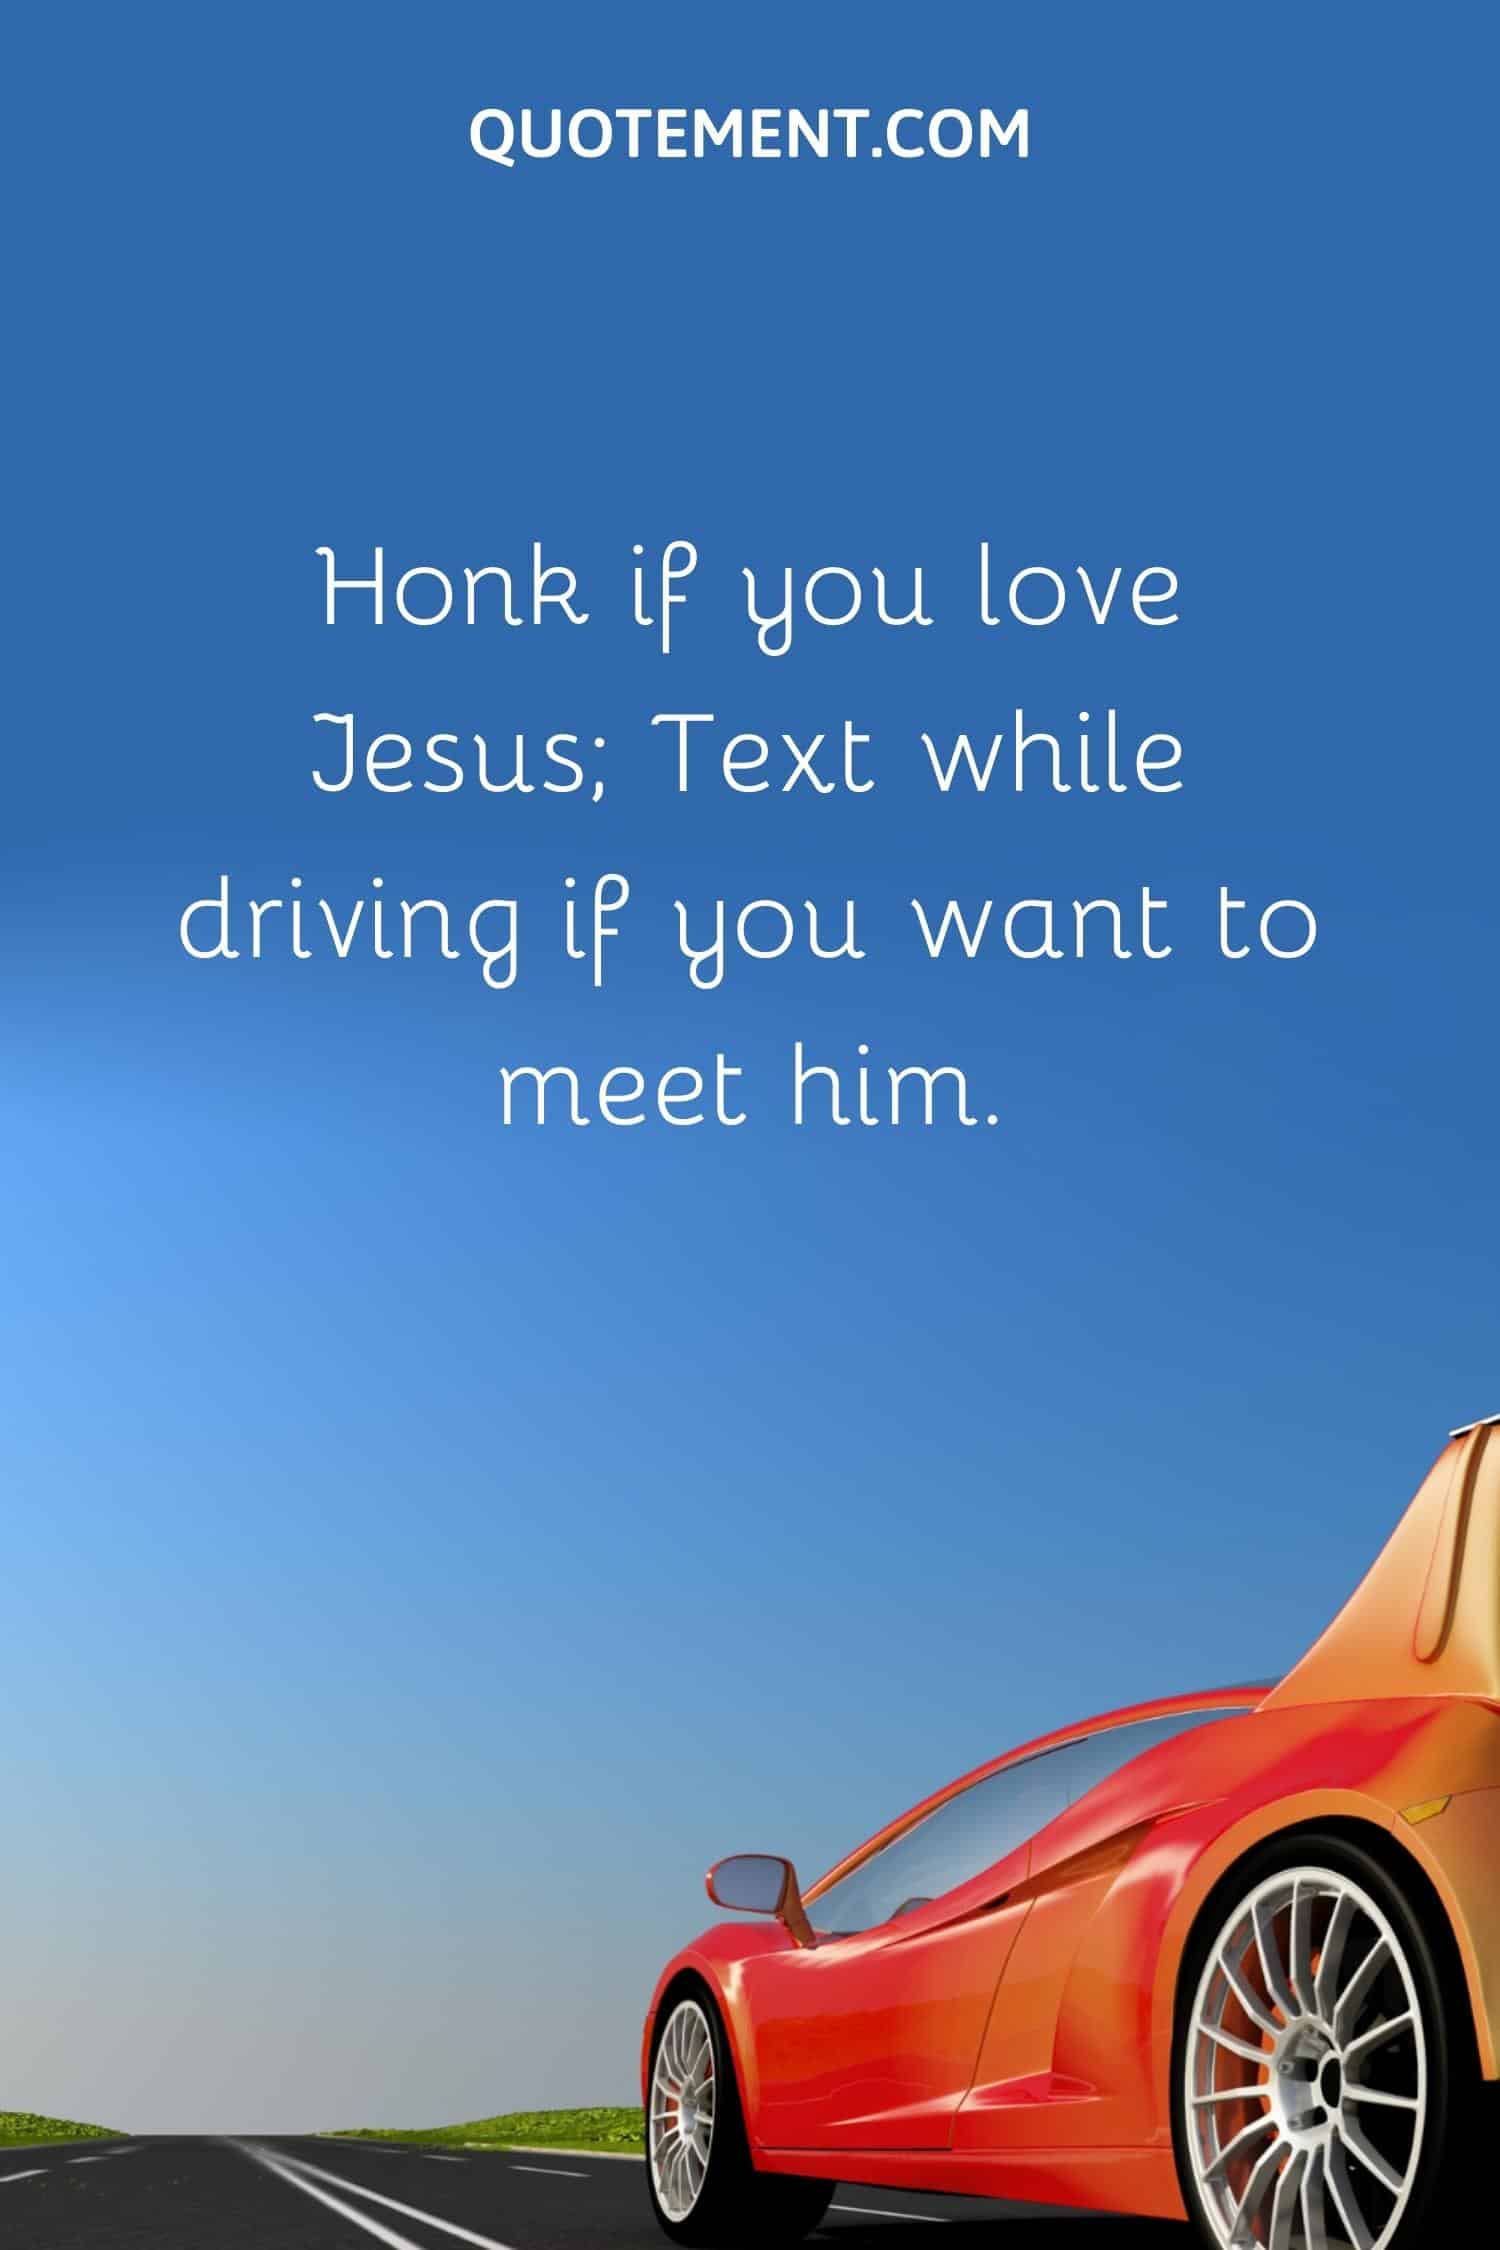 Honk if you love Jesus; Text while driving if you want to meet him